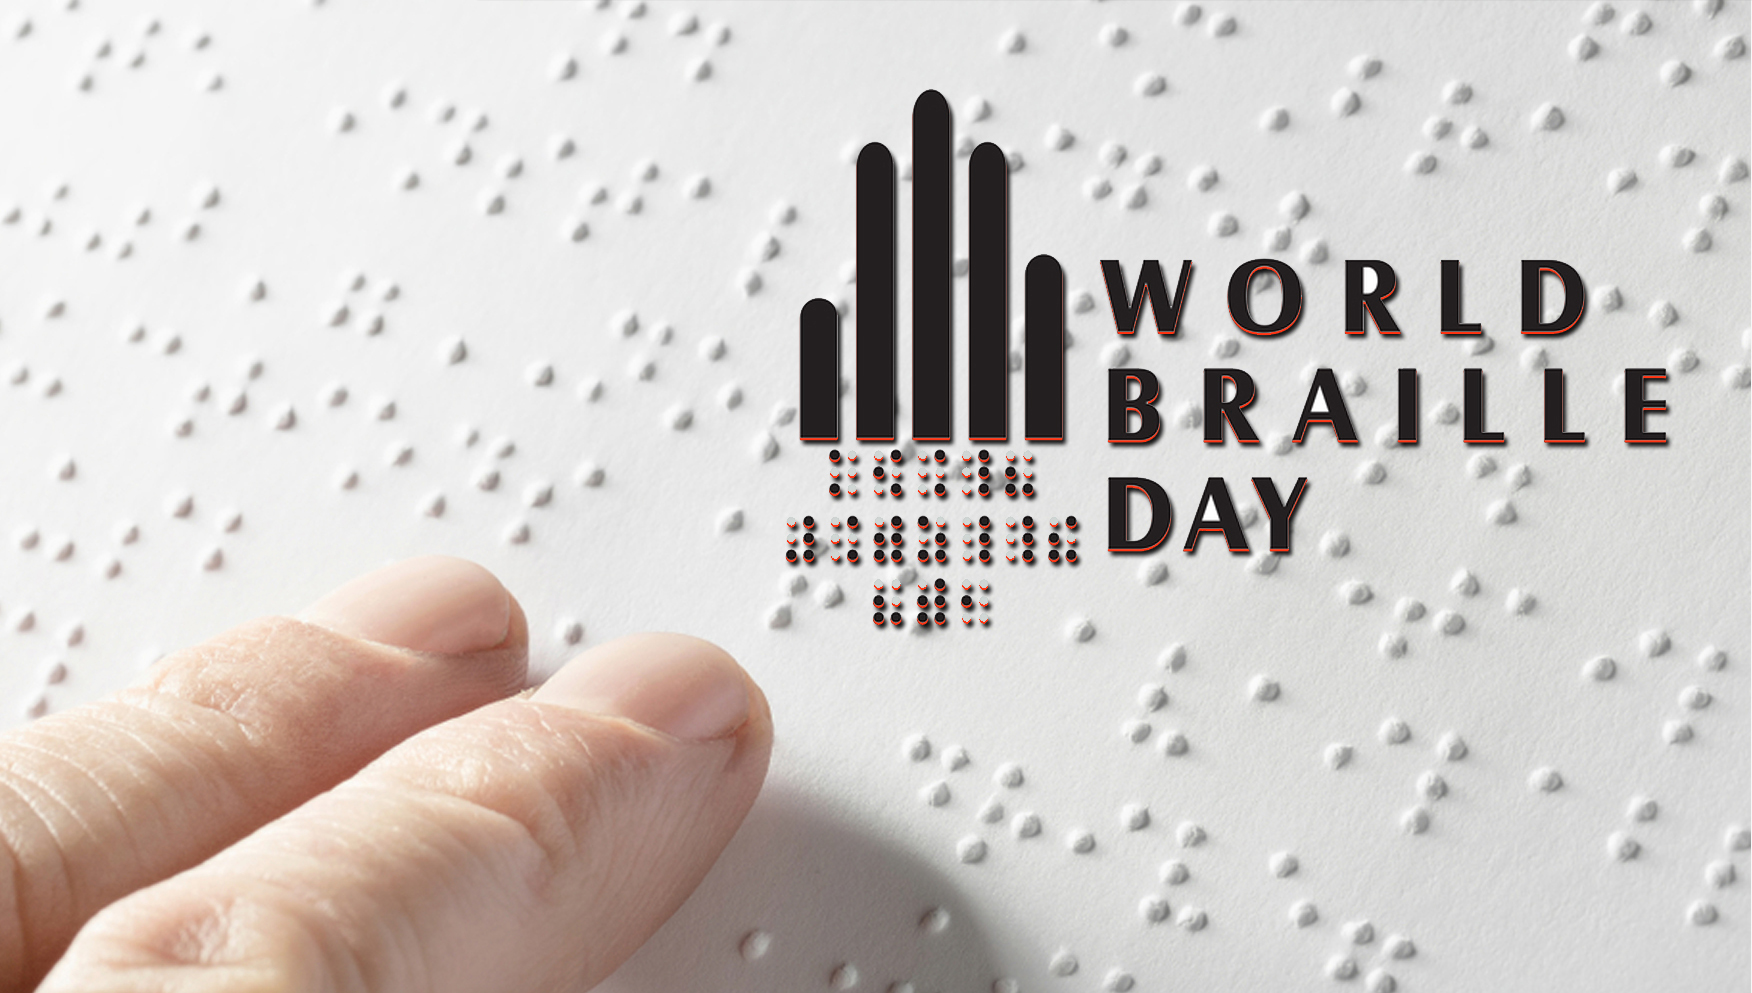 World Braille Day being celebrated today APN News